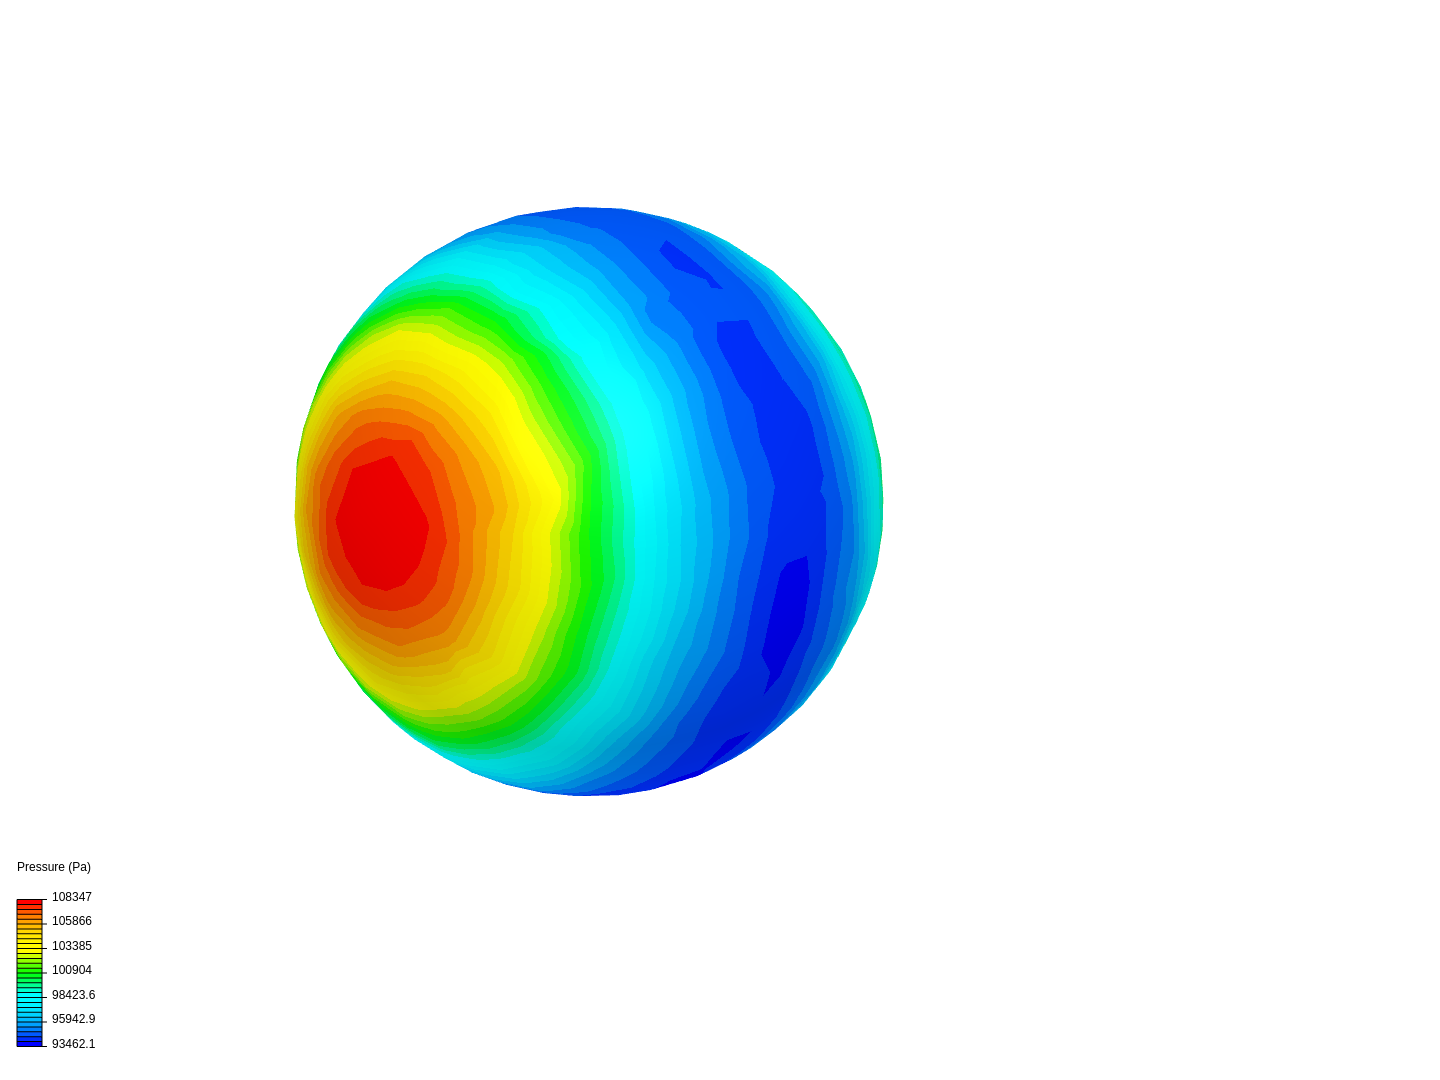 Sphere in test section analysis image